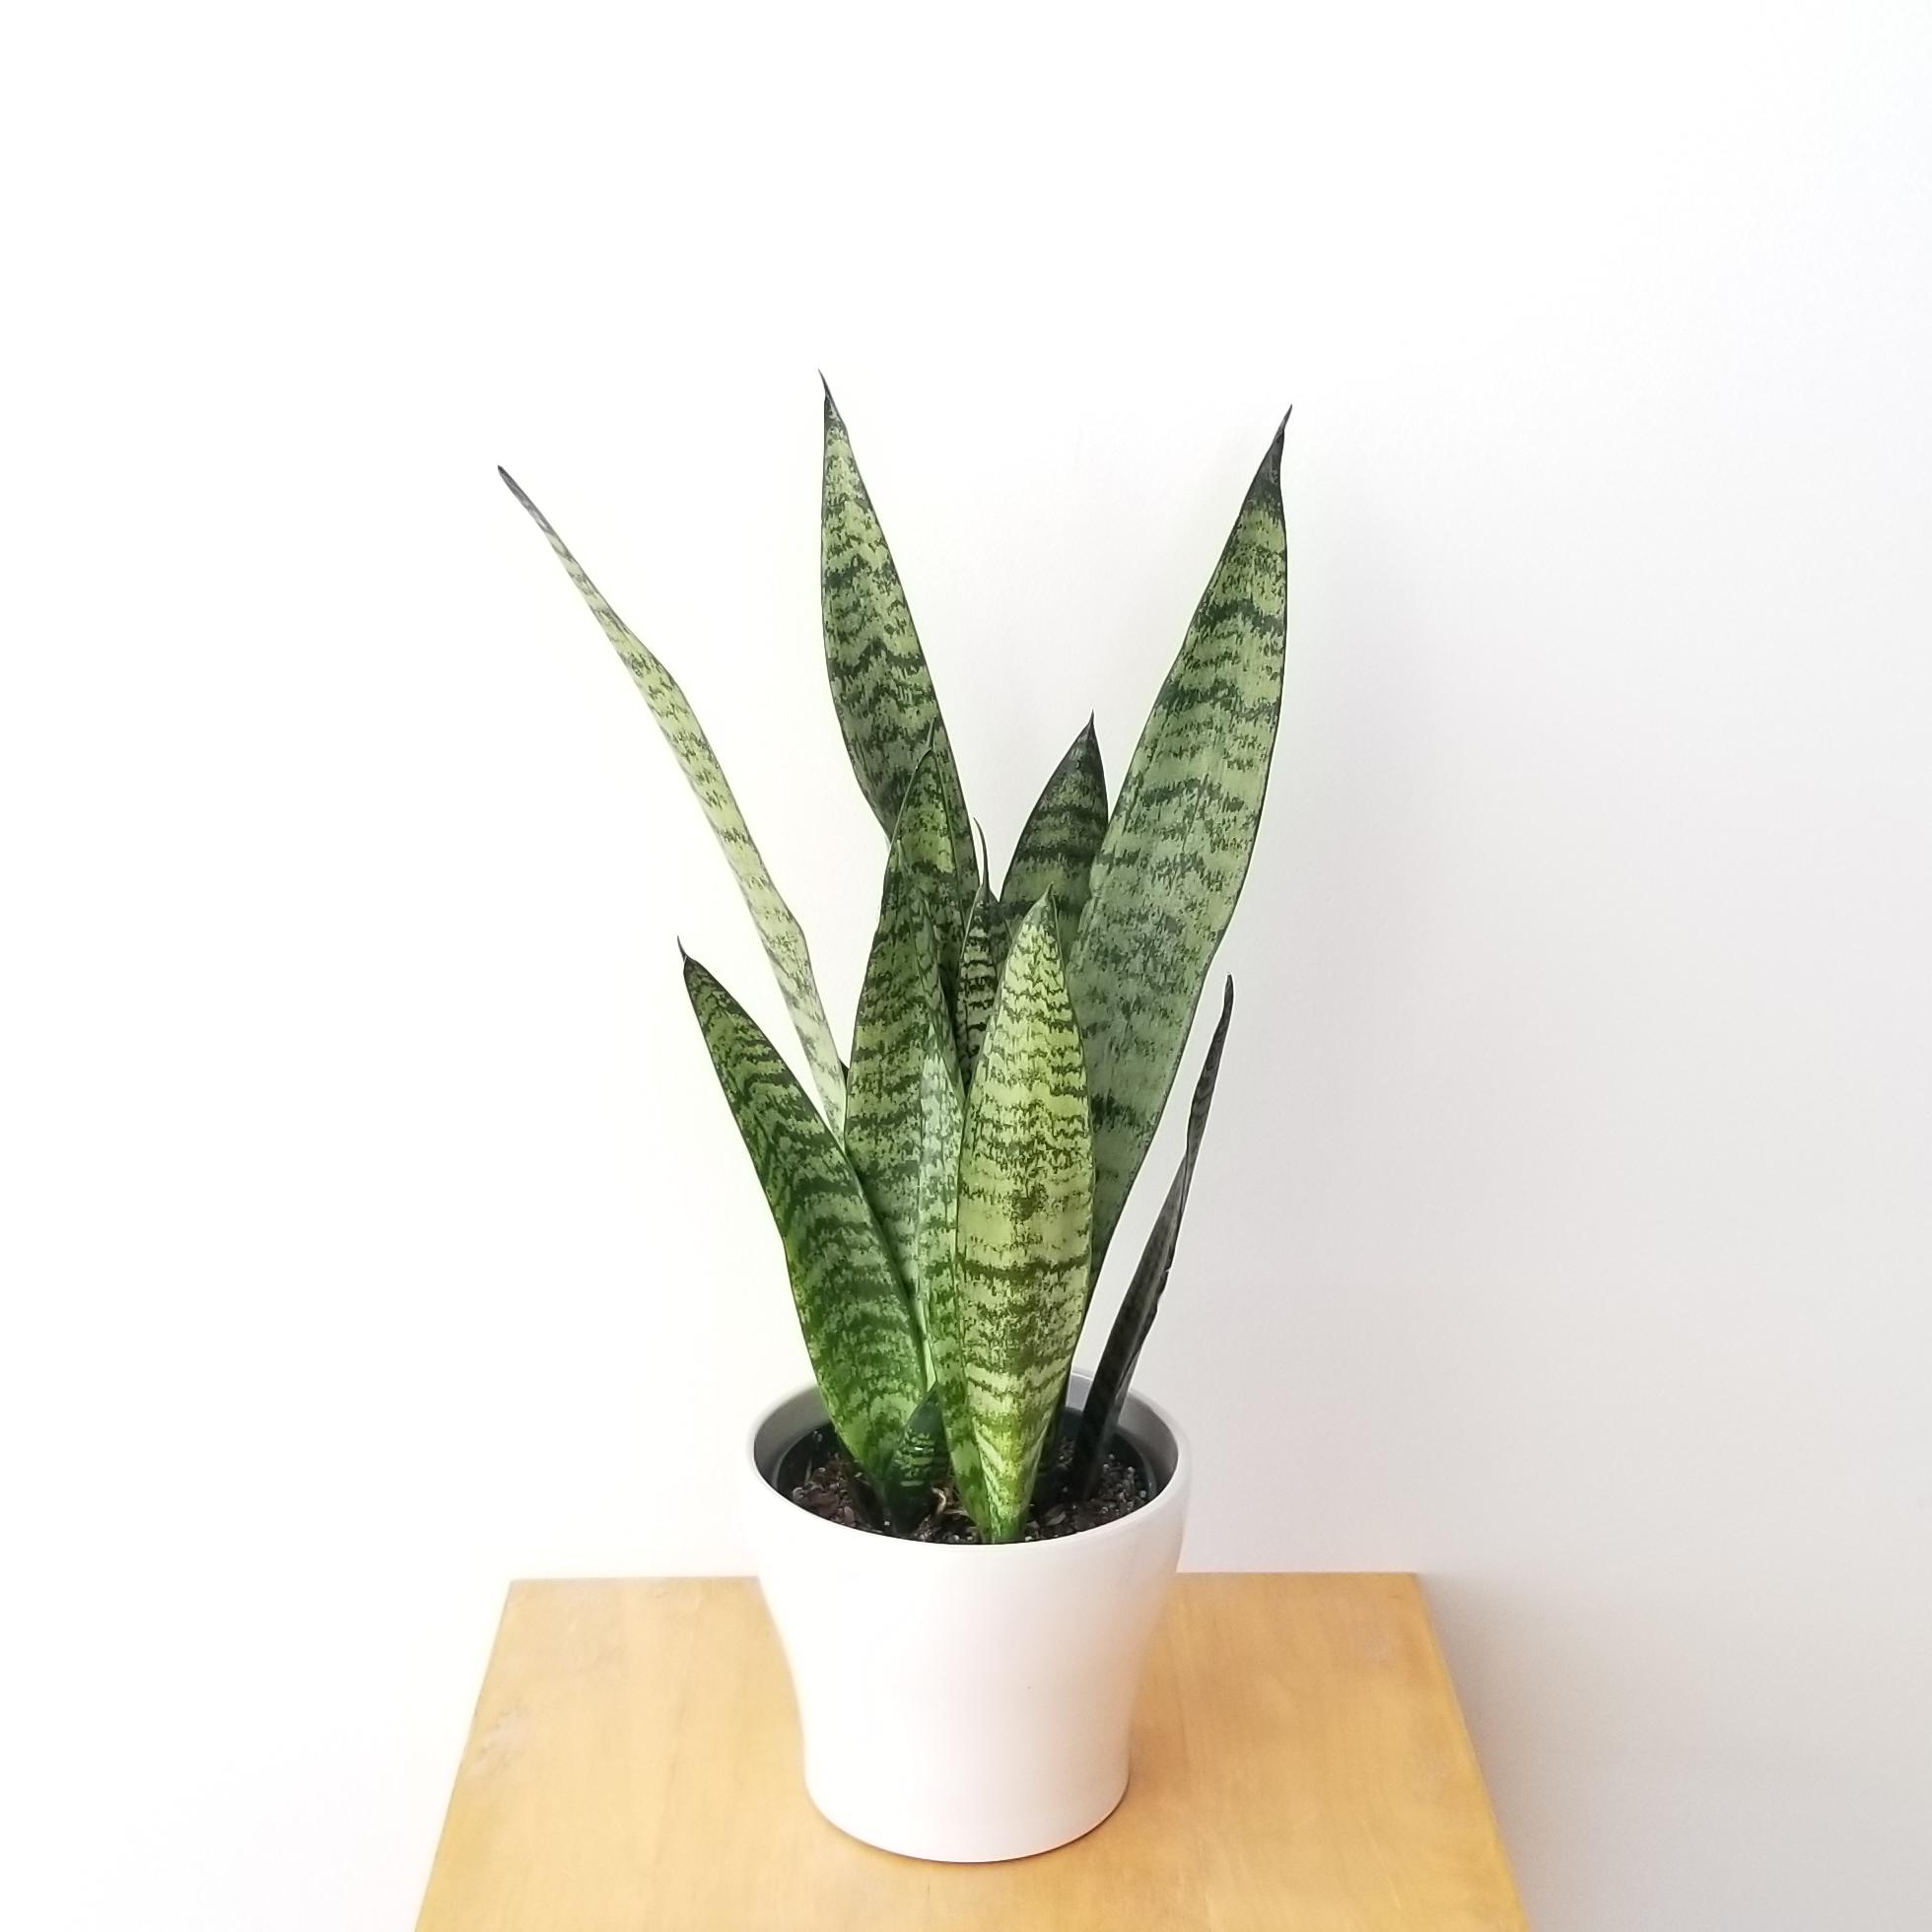 What Parts Of Snake plant Are Poisonous or Toxic?